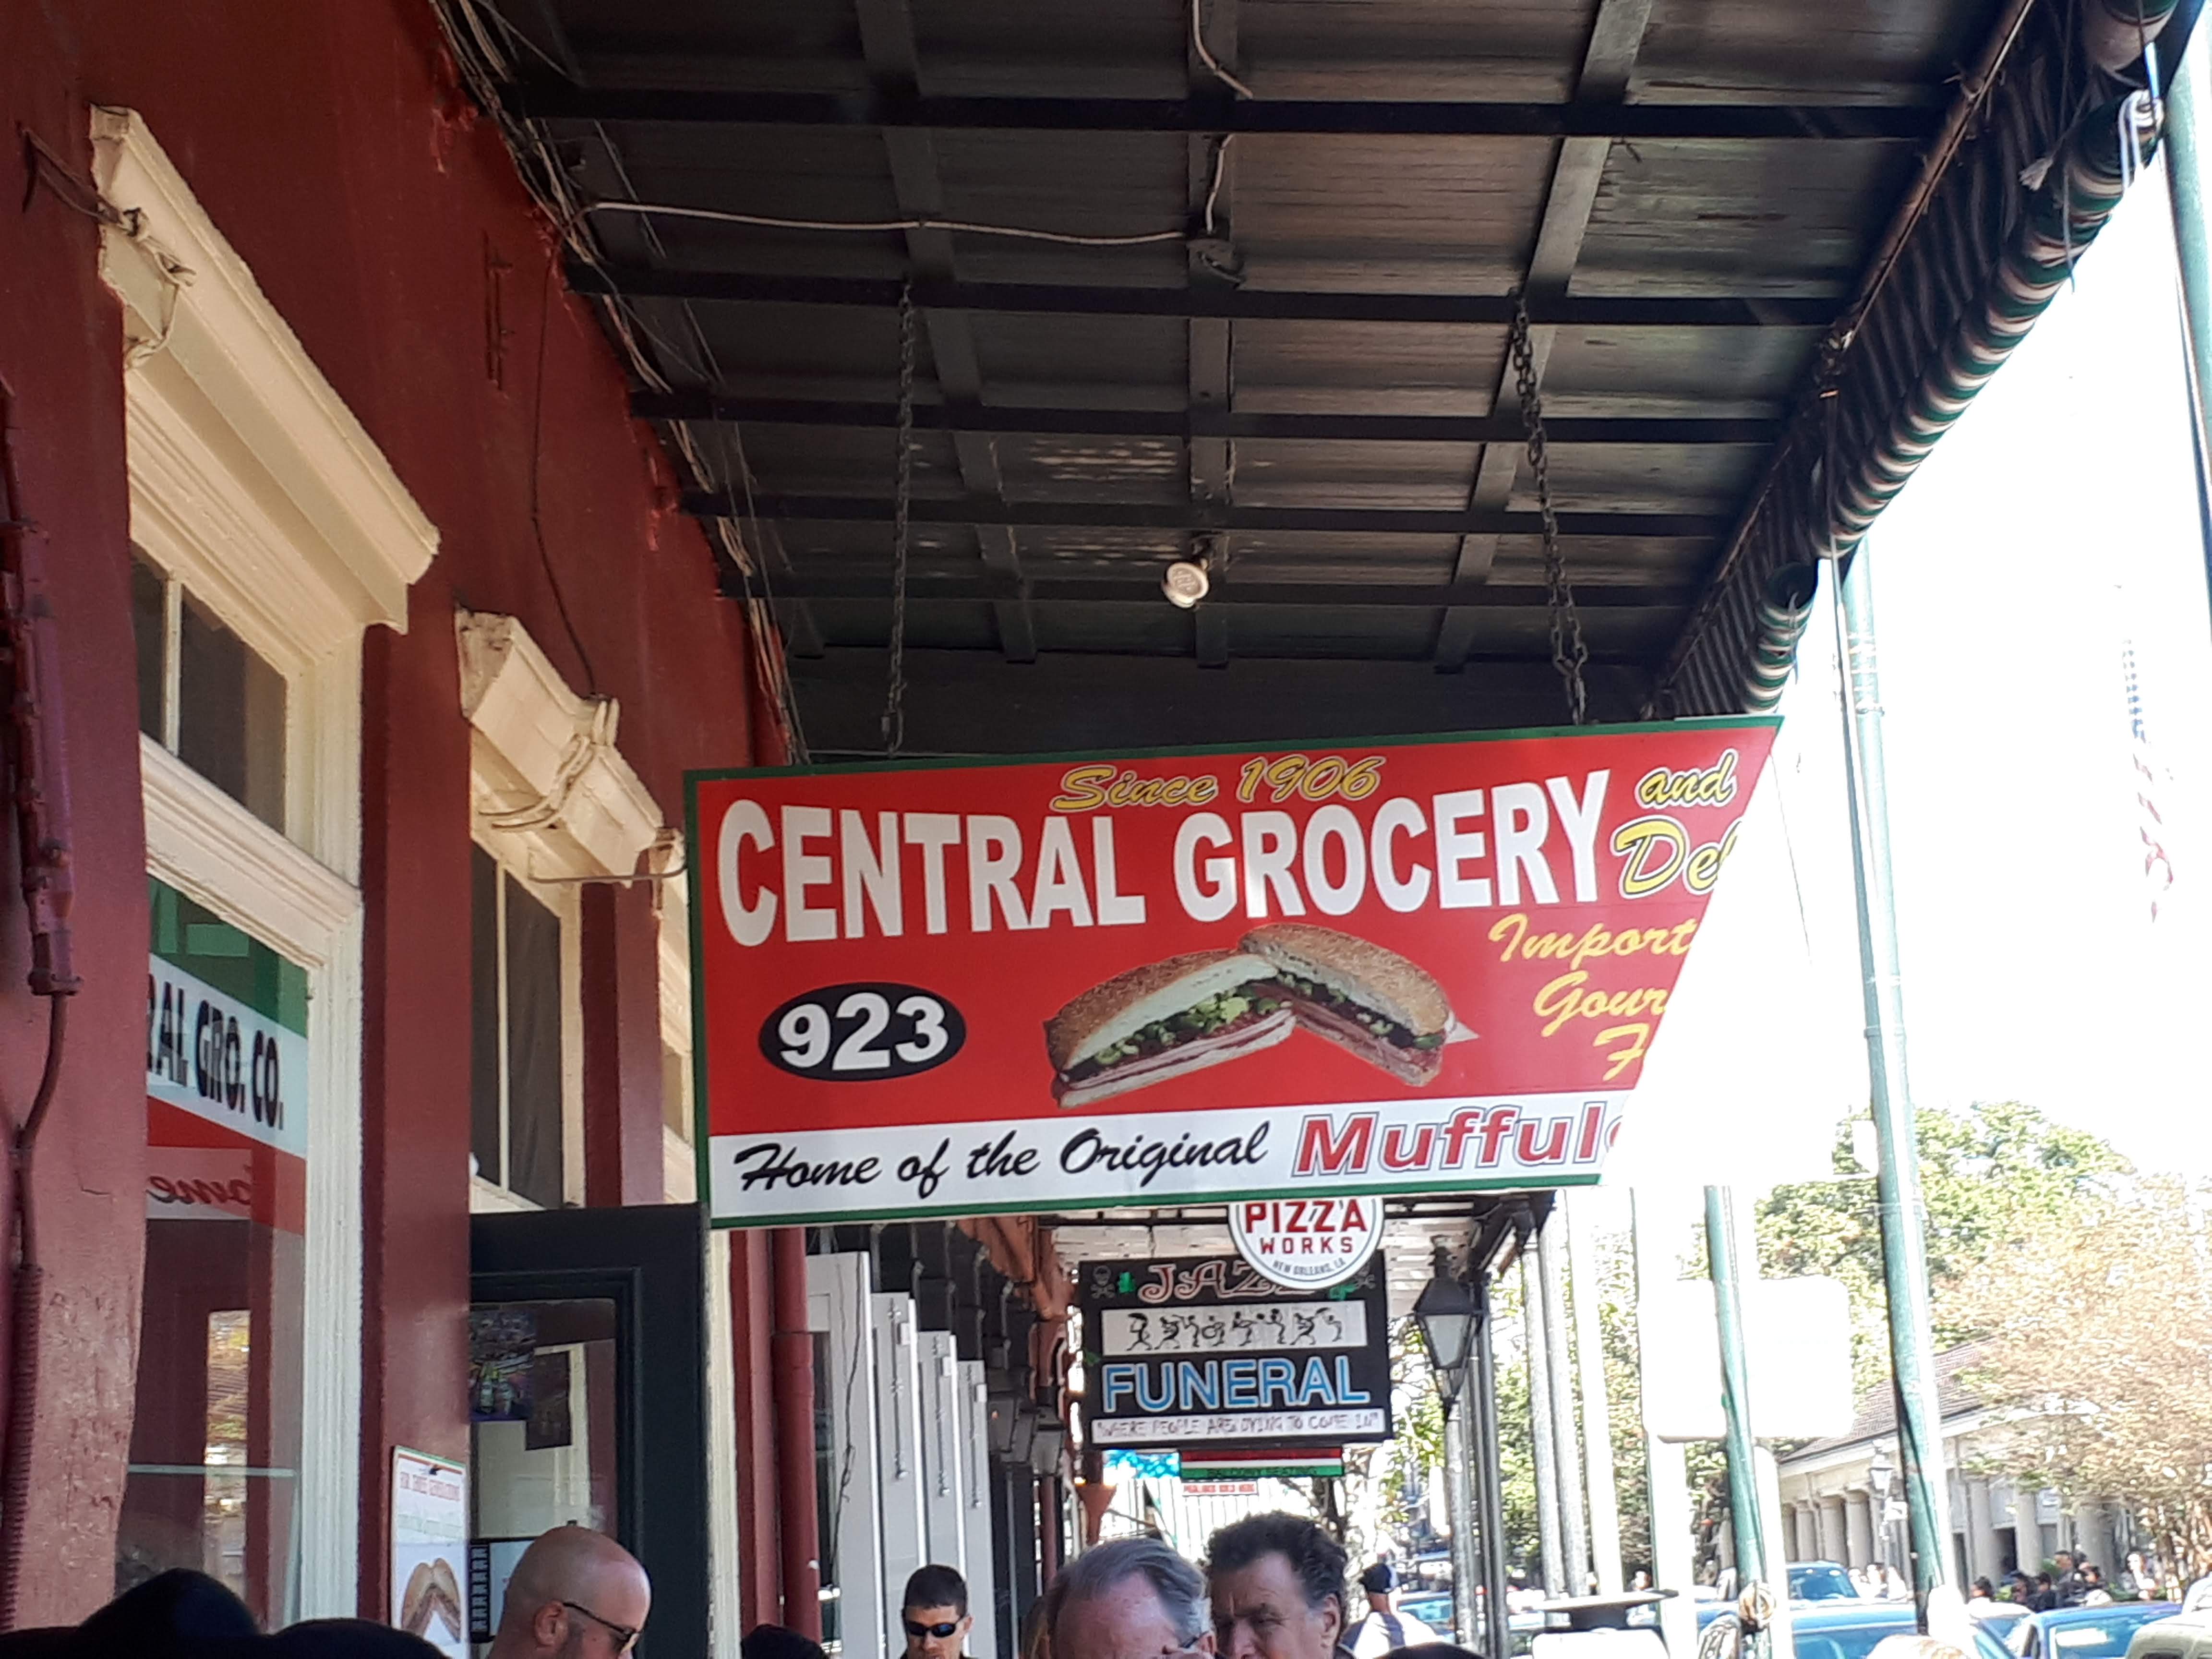 Central Grocery considered the best place to get a Muffuletta in New Orleans - My choice for Good Eats in New Orleans